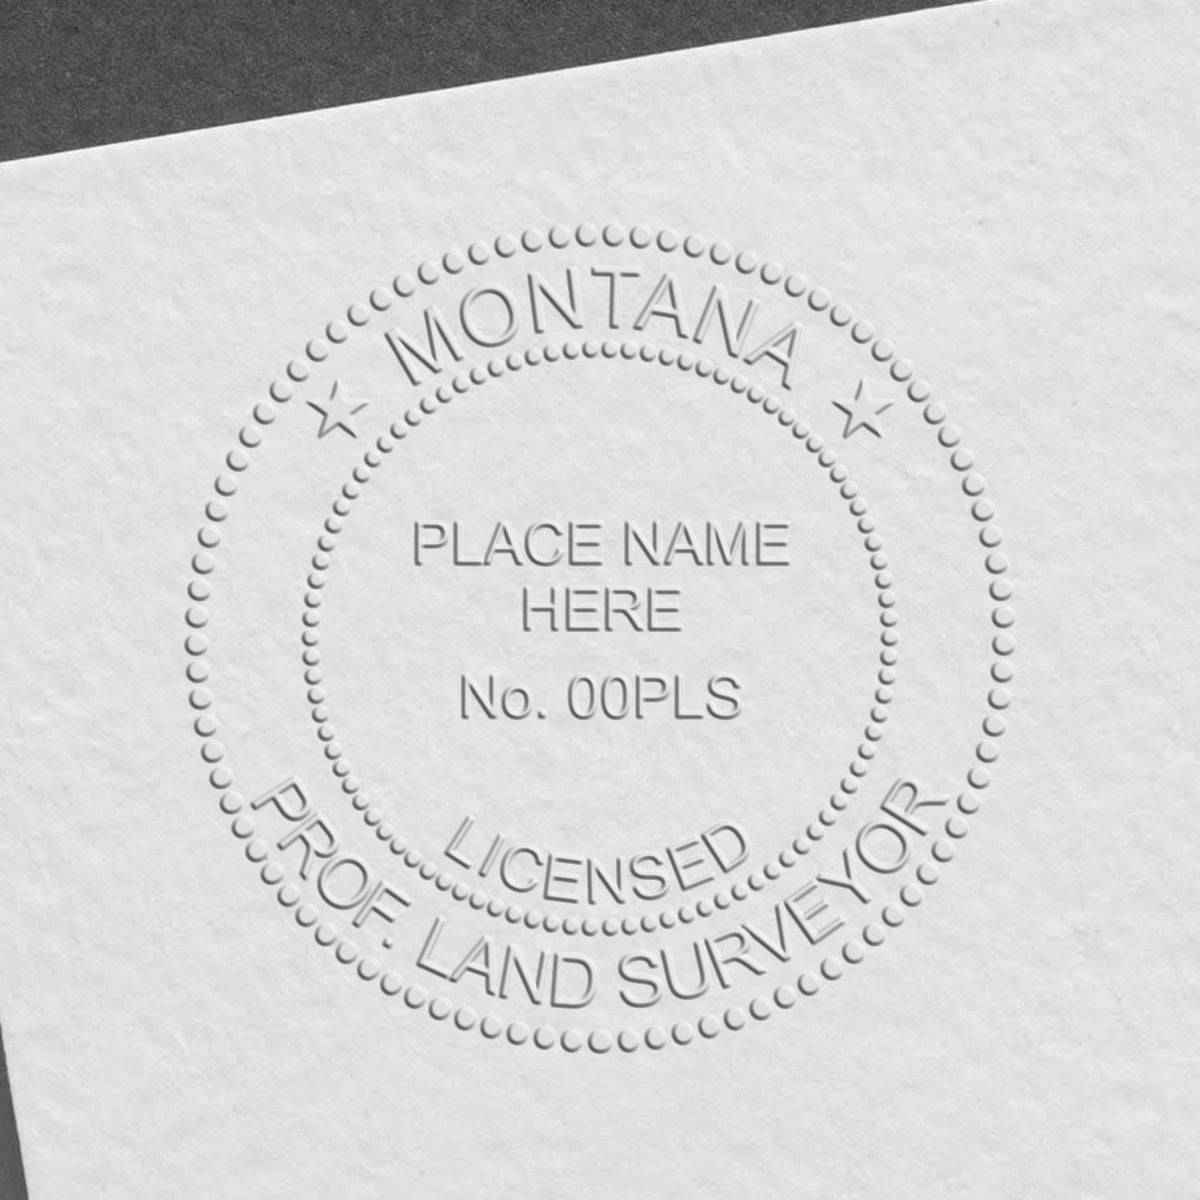 A stamped impression of the Montana Desk Surveyor Seal Embosser in this stylish lifestyle photo, setting the tone for a unique and personalized product.